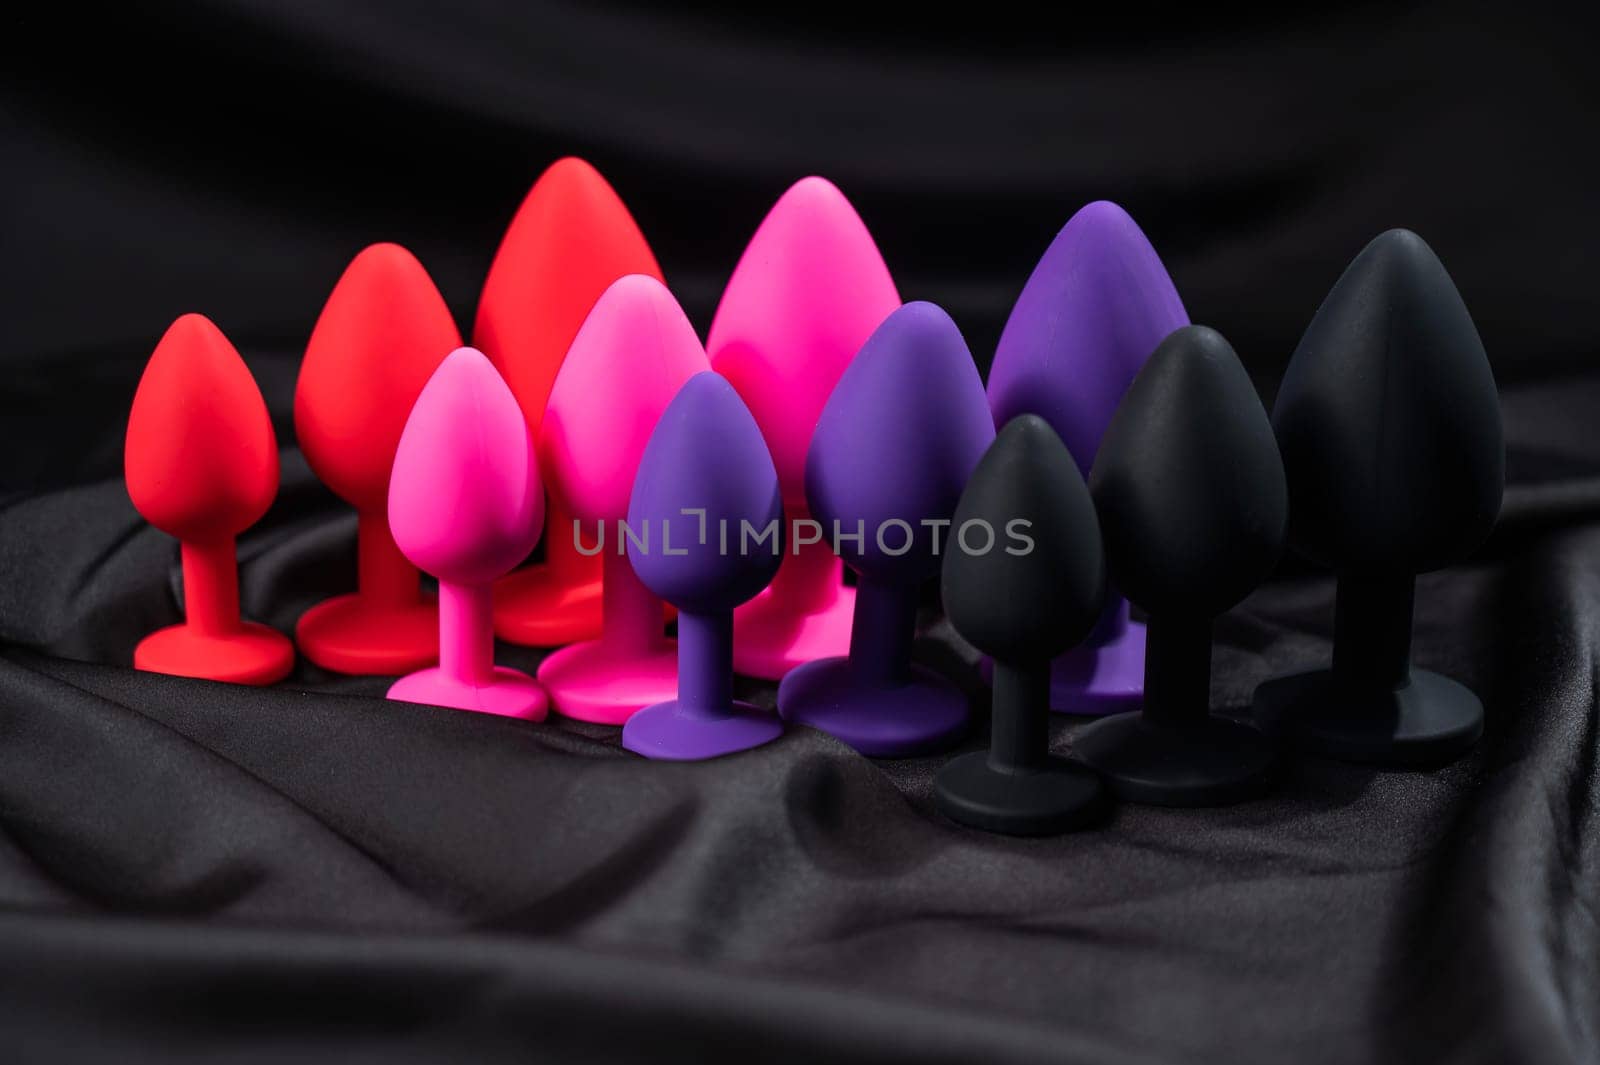 A set of silicone anal plugs in different colors and sizes on a black silk sheet. by mrwed54